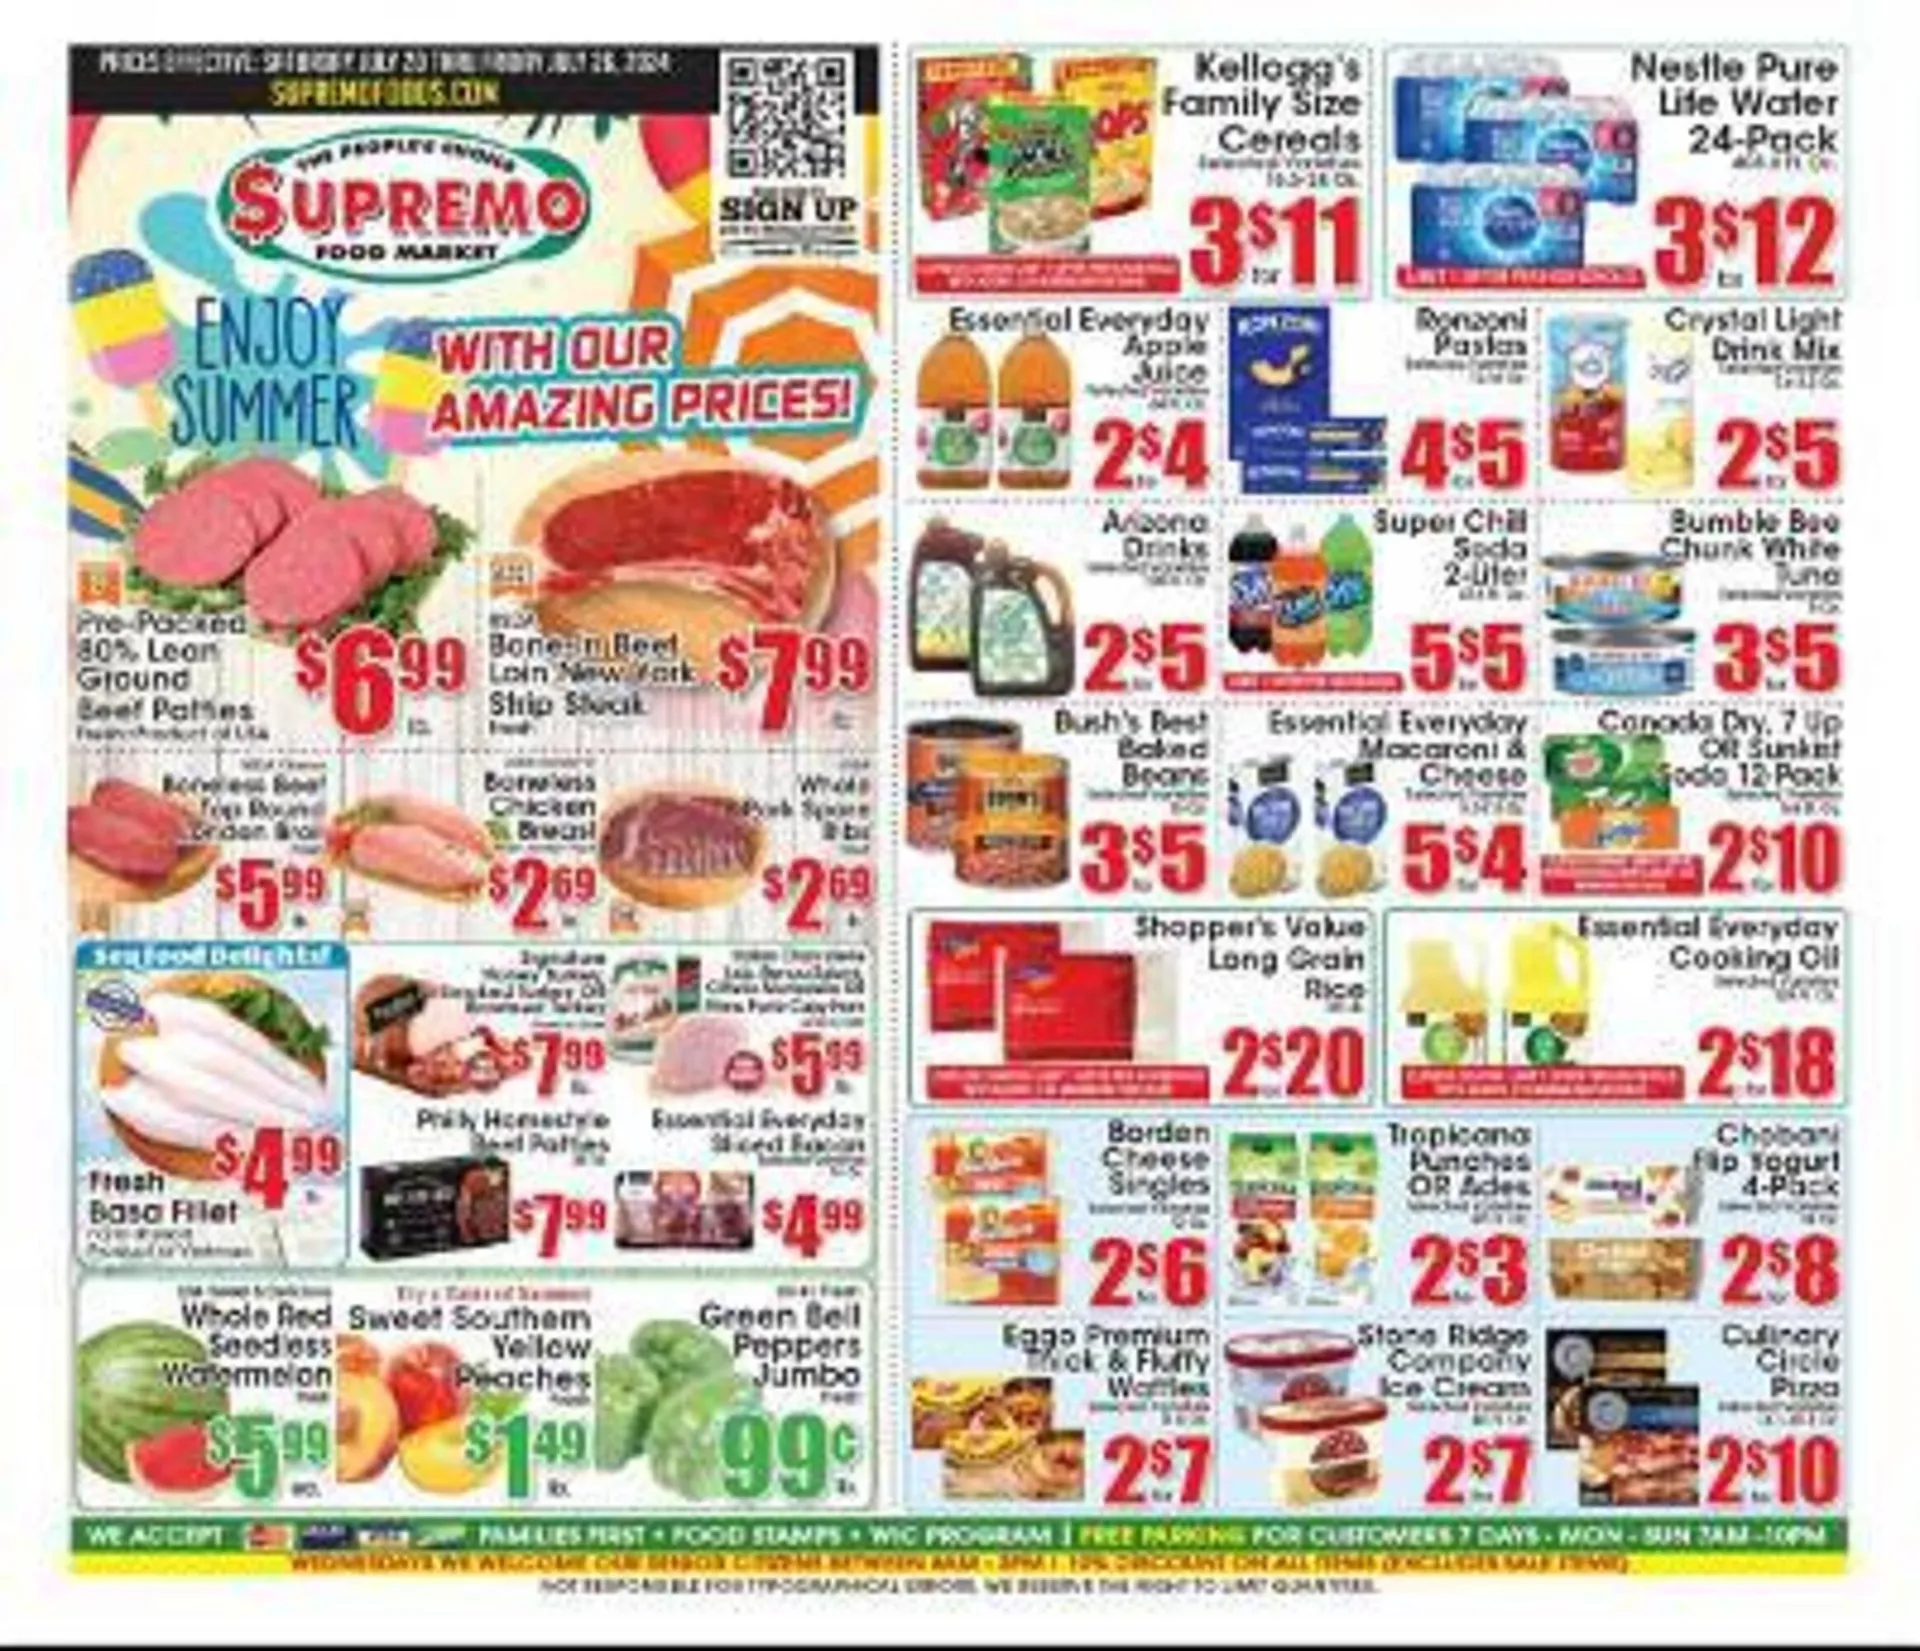 Supremo Foods Inc Weekly Ad - 1